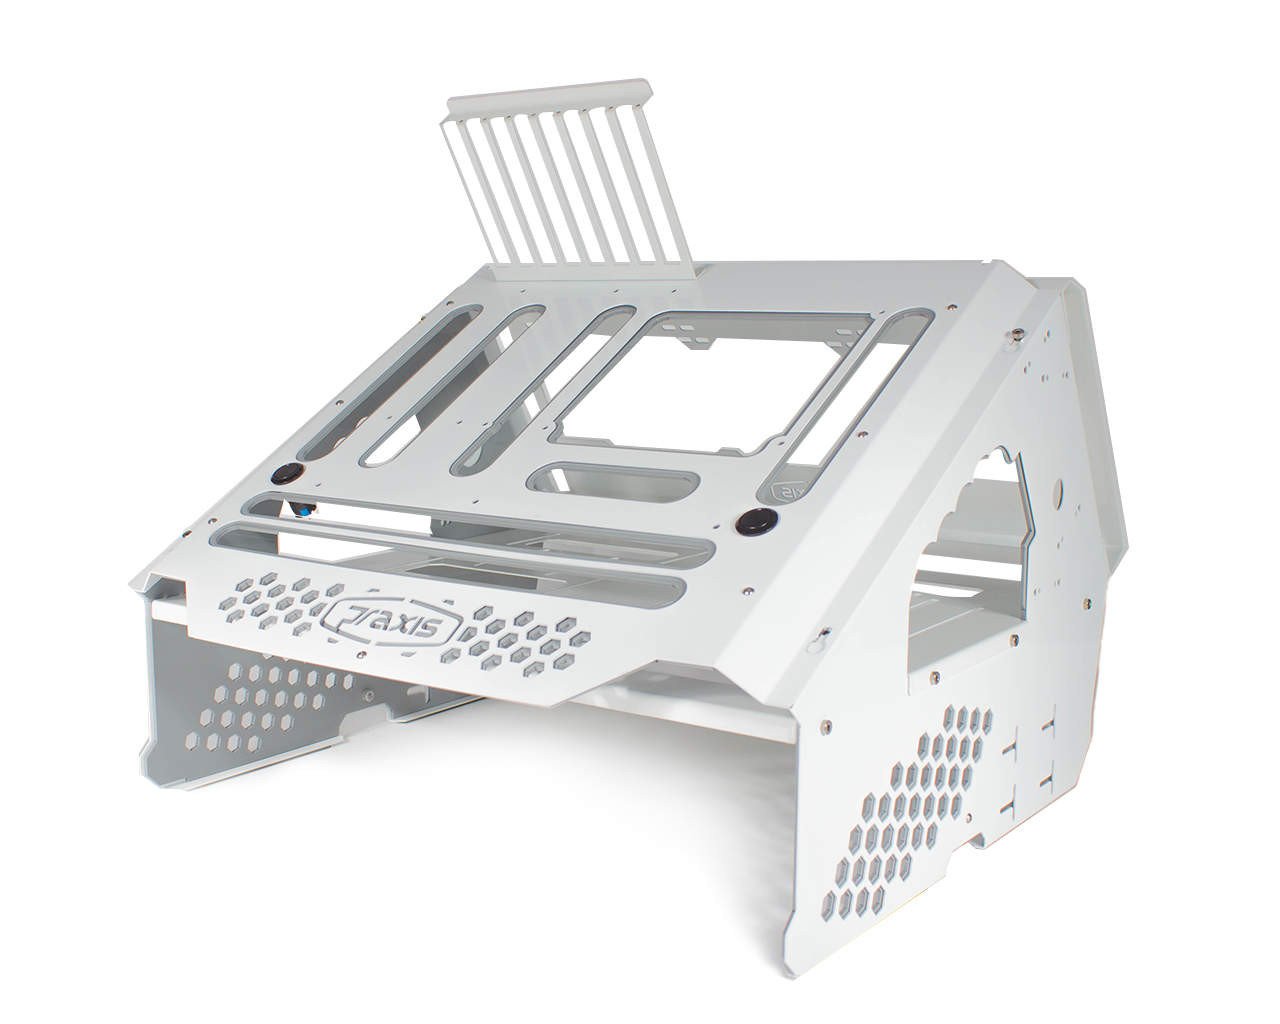 PrimoChill's Praxis Wetbench Powdercoated Steel Modular Open Air Computer Test Bench for Watercooling or Air Cooled Components - PrimoChill - KEEPING IT COOL White w/Solid Grey Accents